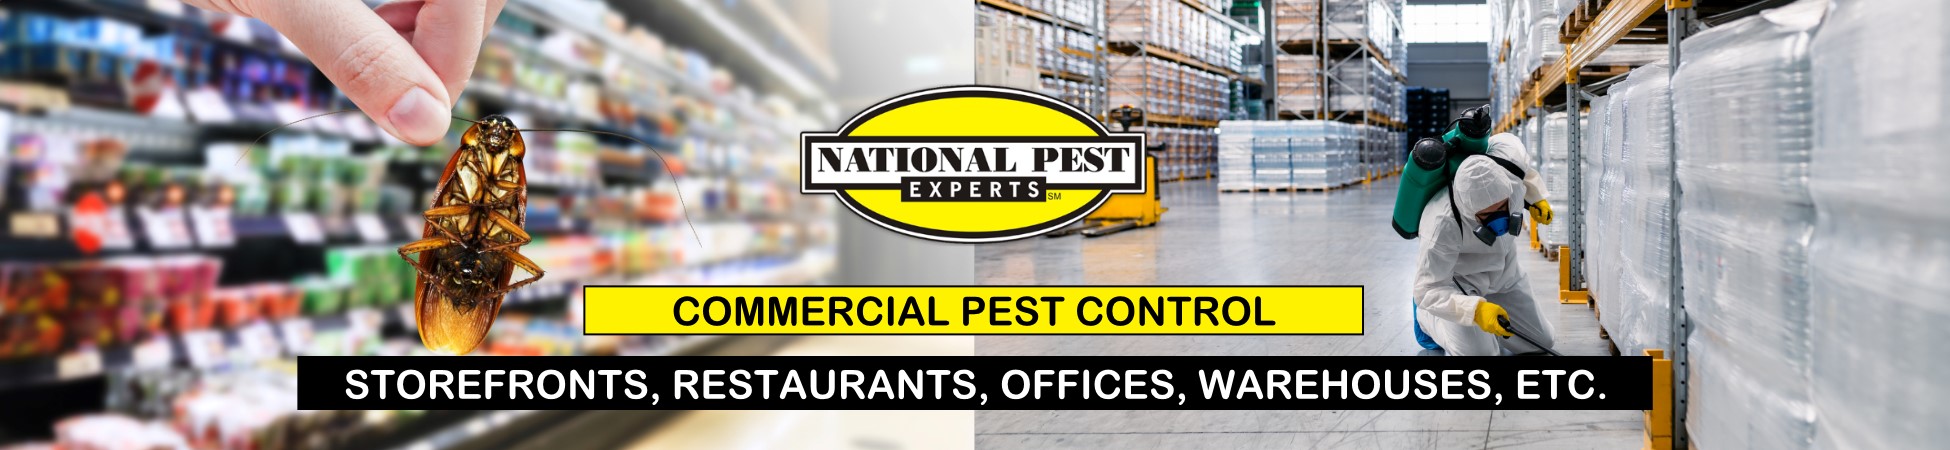 National Pest Experts - Commercial & Industrial exterminating and pest control in South Farmingdale, NY